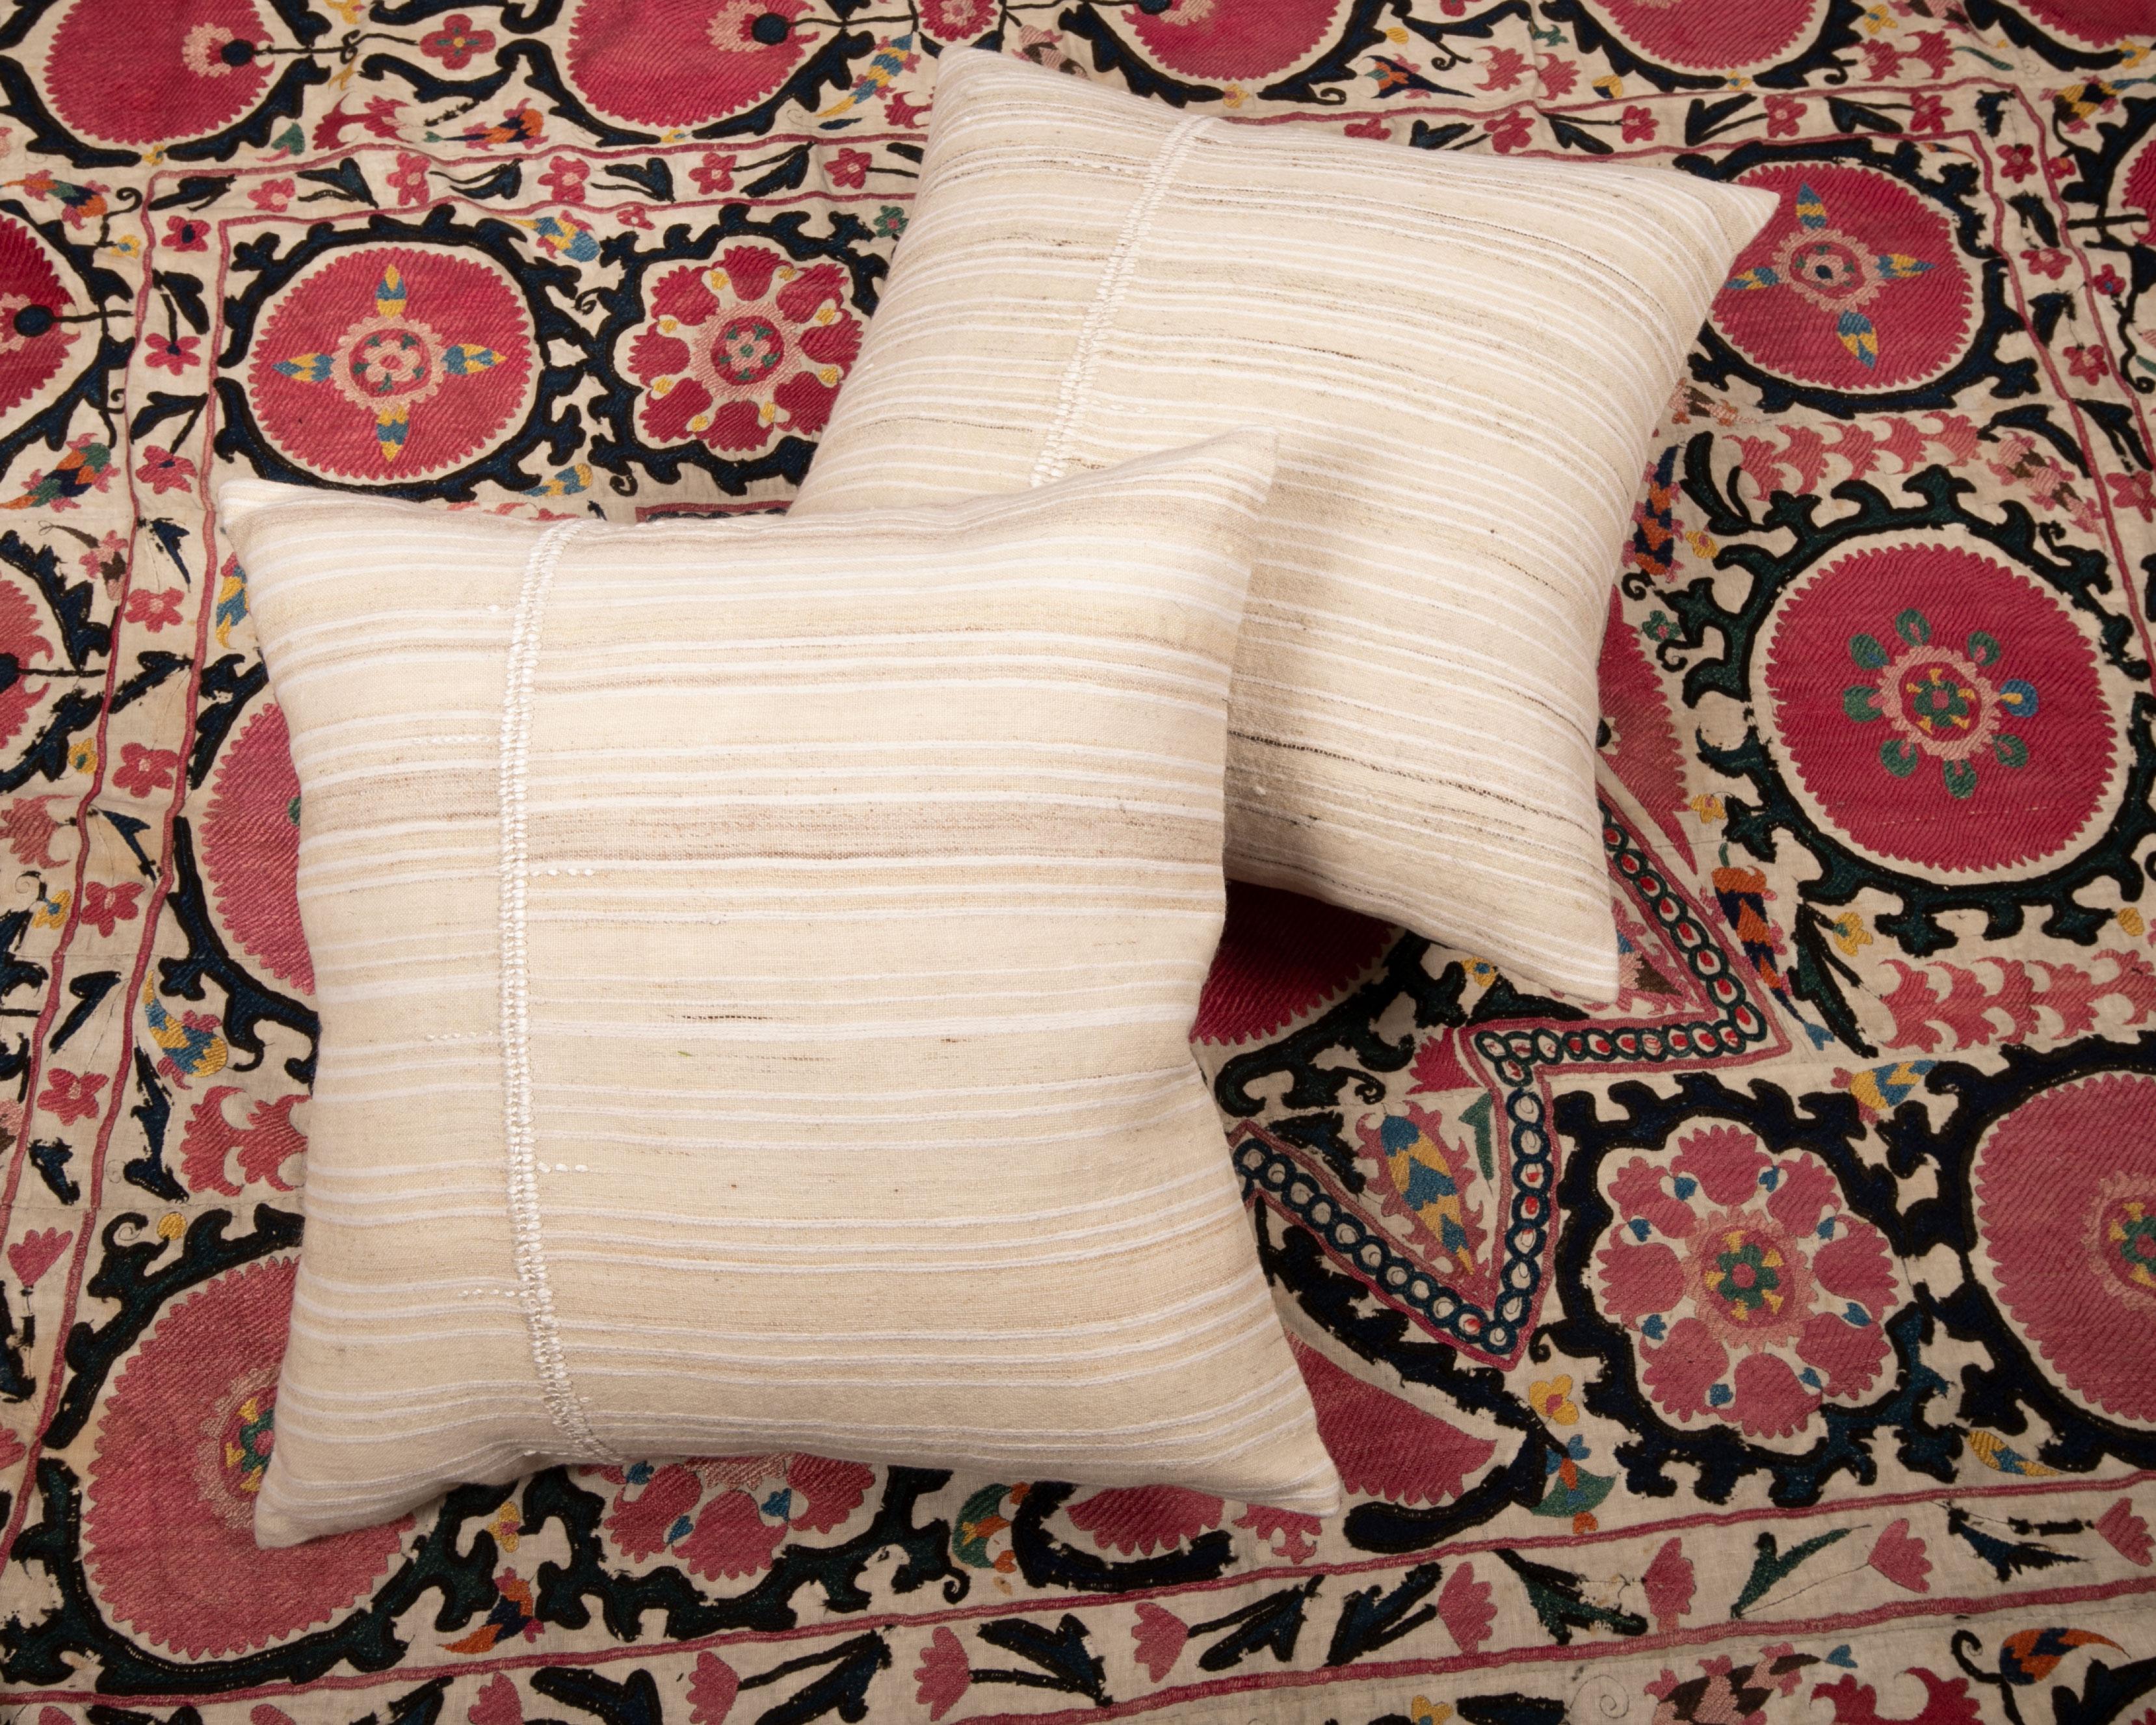 Cotton Pillow Cases Made from Vintage Anatolian Wool Covers, 1960s